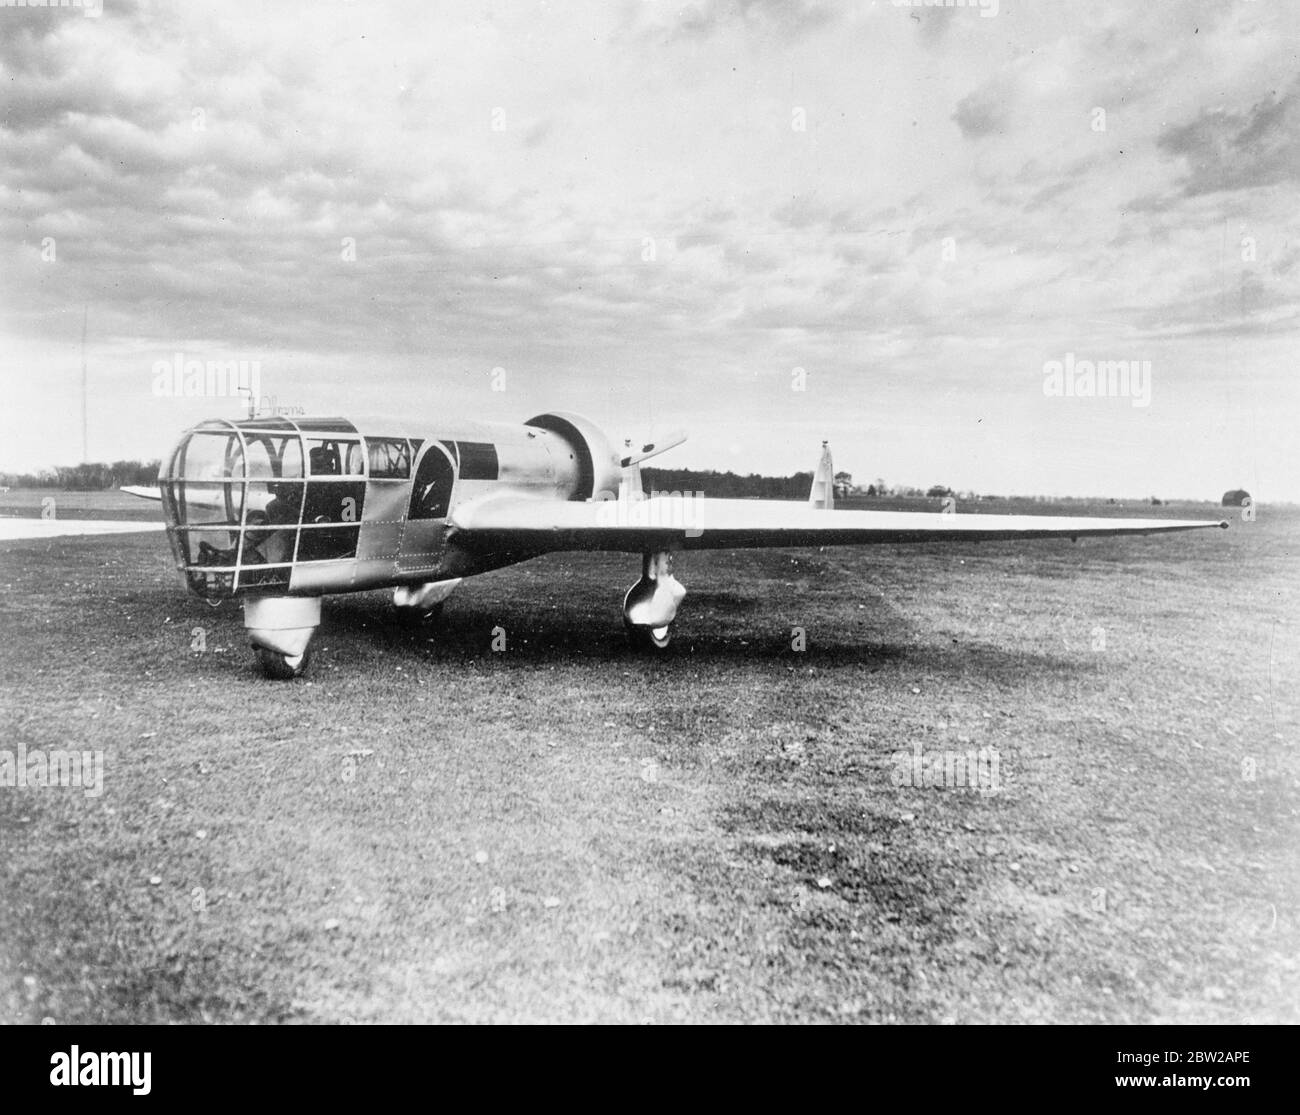 Plane with a glass nose for mapmakers. Designed for the use of aerial mappers, an unusual, glass nosed aeroplane has been undergoing tests at Marshall, Michigan. The machine eliminated many of the limitations which have confronted flying surveyors in ordinary planes. Constructed on plans drawn up by Talbert Abrams, an aerial survey company official, the plane affords unobstructed forward and downward vision for pilot and photographers, stability and long cruising radius. The motor is in the rear of the cockpit and is fitted with a pusher propeller. 8 December 1937 Stock Photo